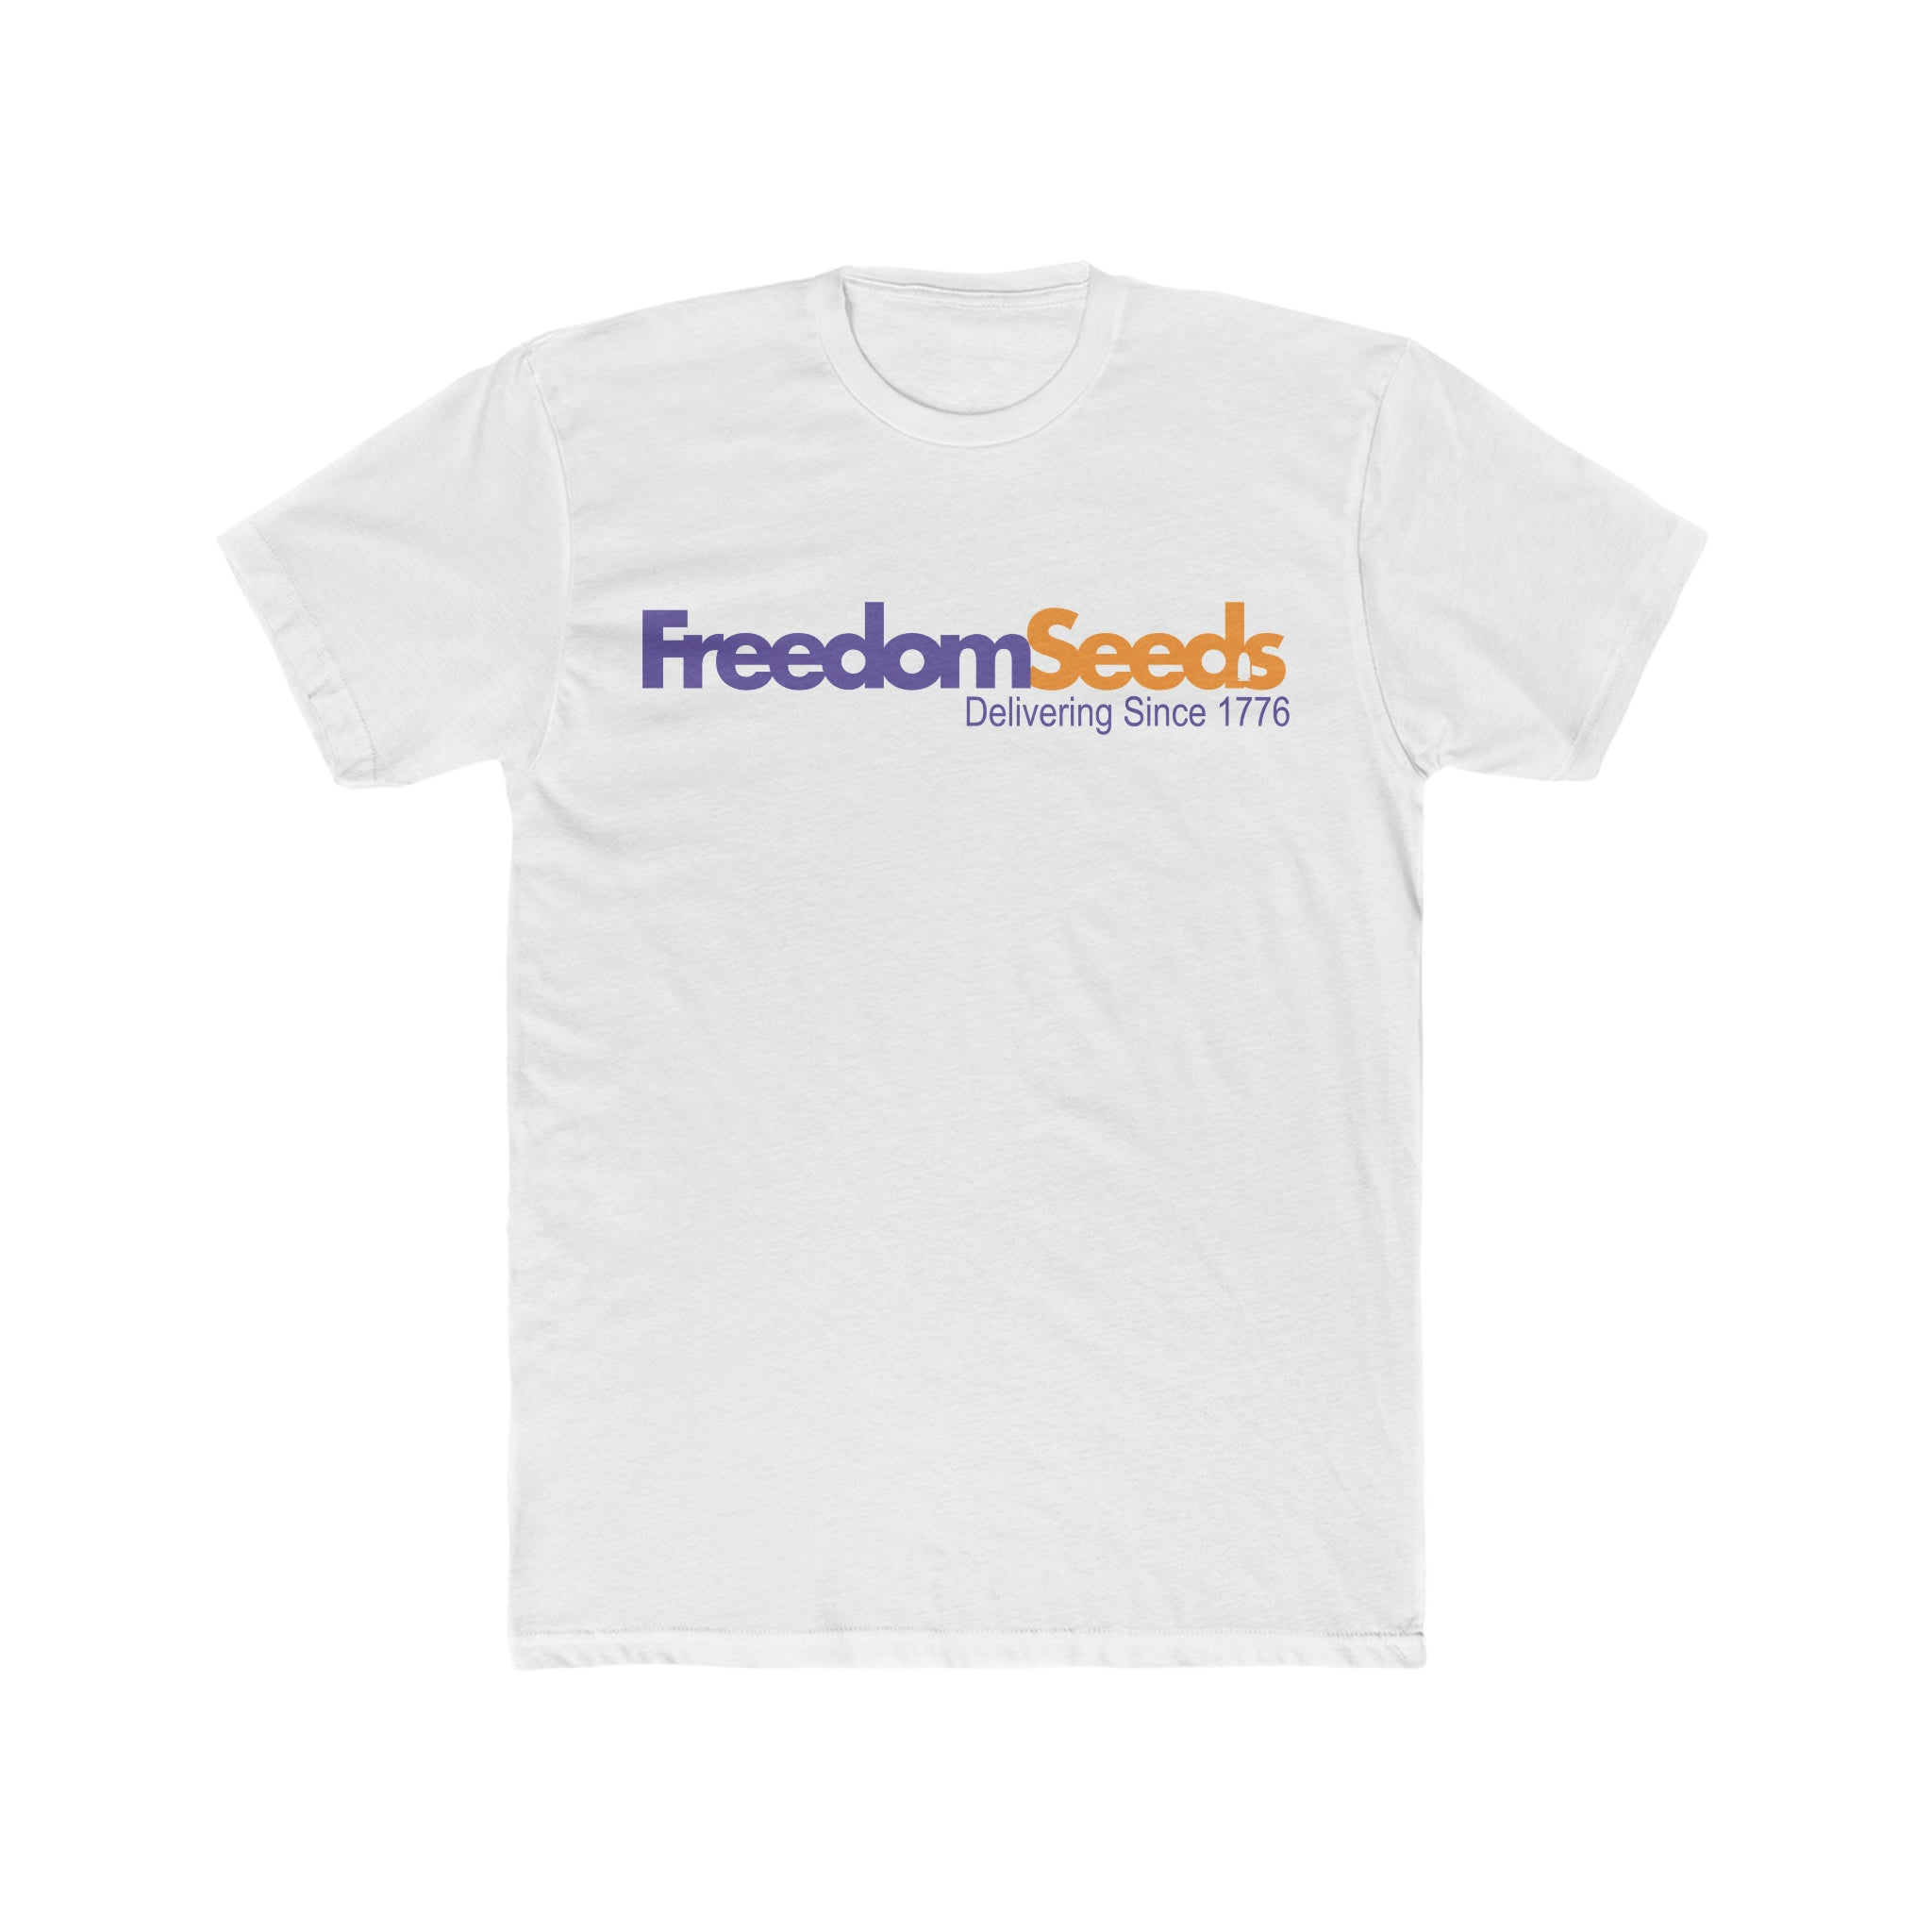 Men's Premium Fitted Freedom Seeds T-Shirt